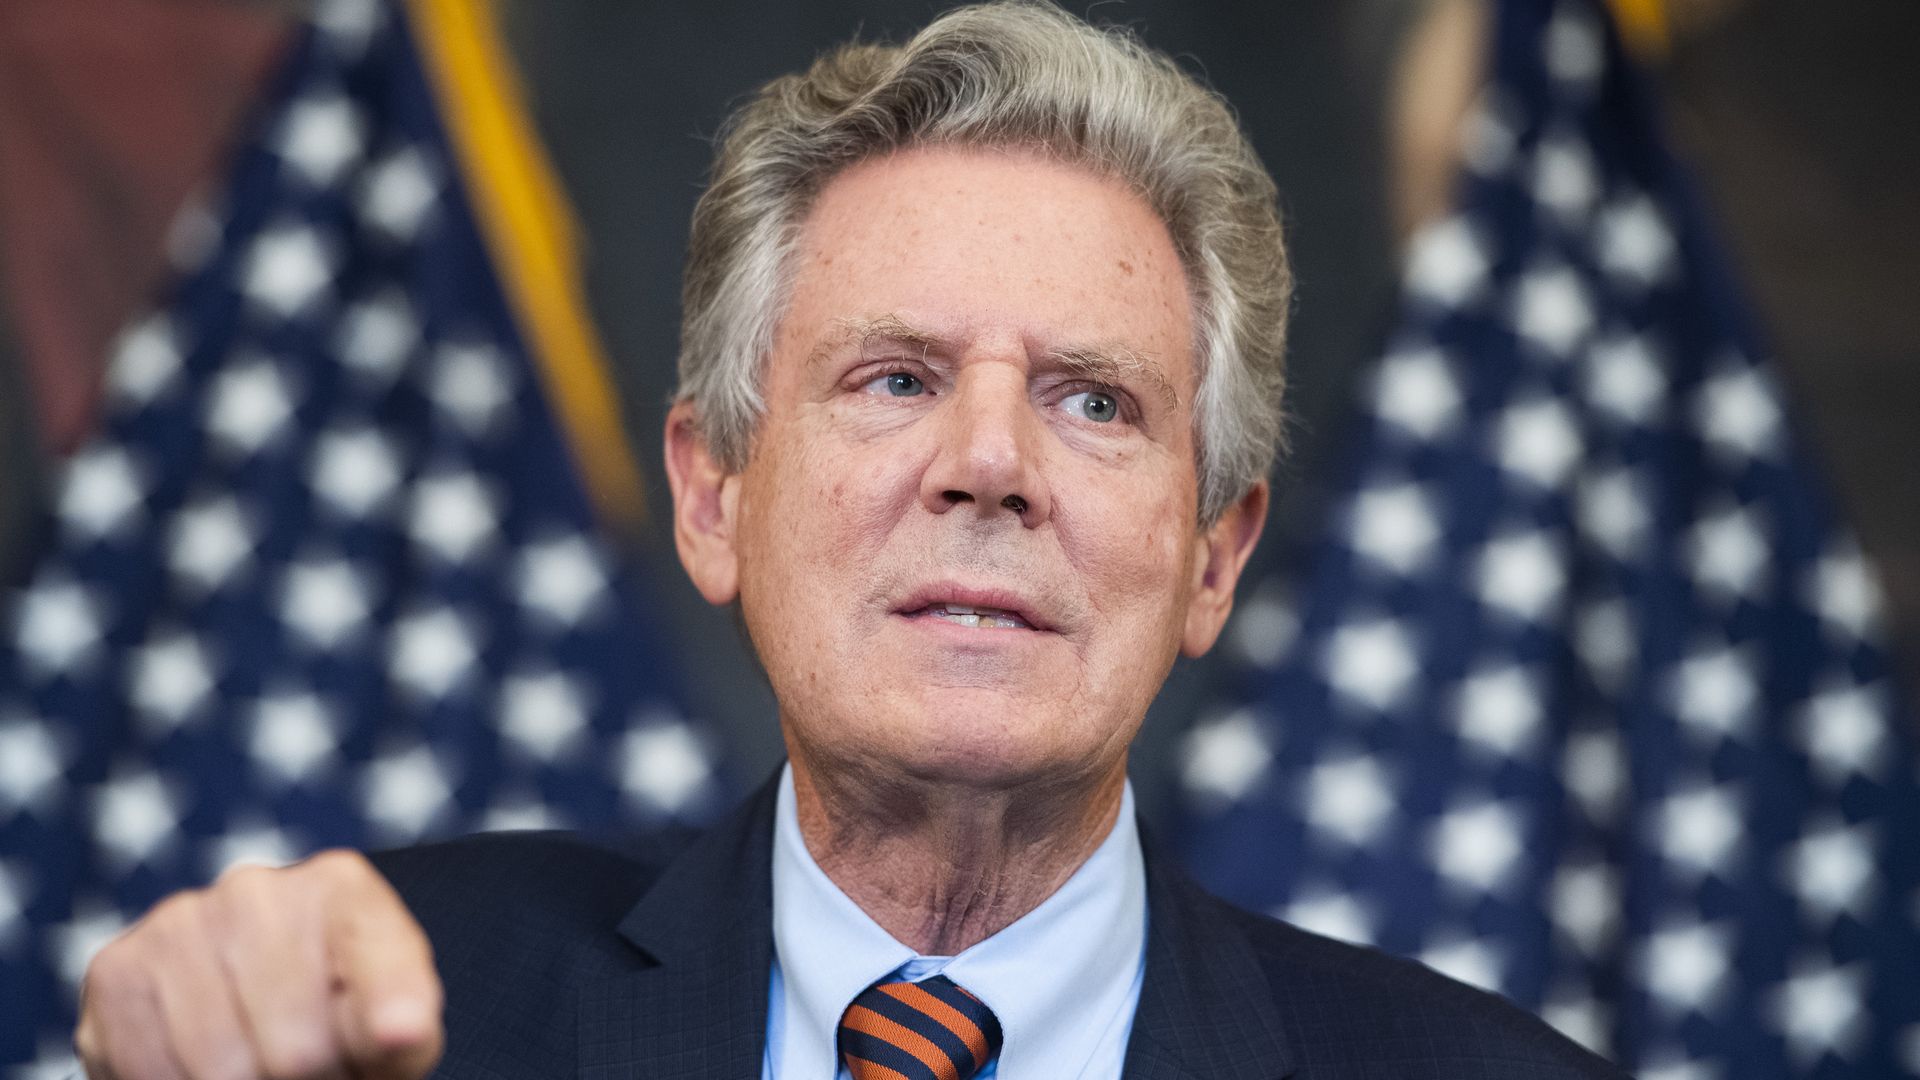 A photo of Rep. Frank Pallone (D-NJ) pointing a fist.